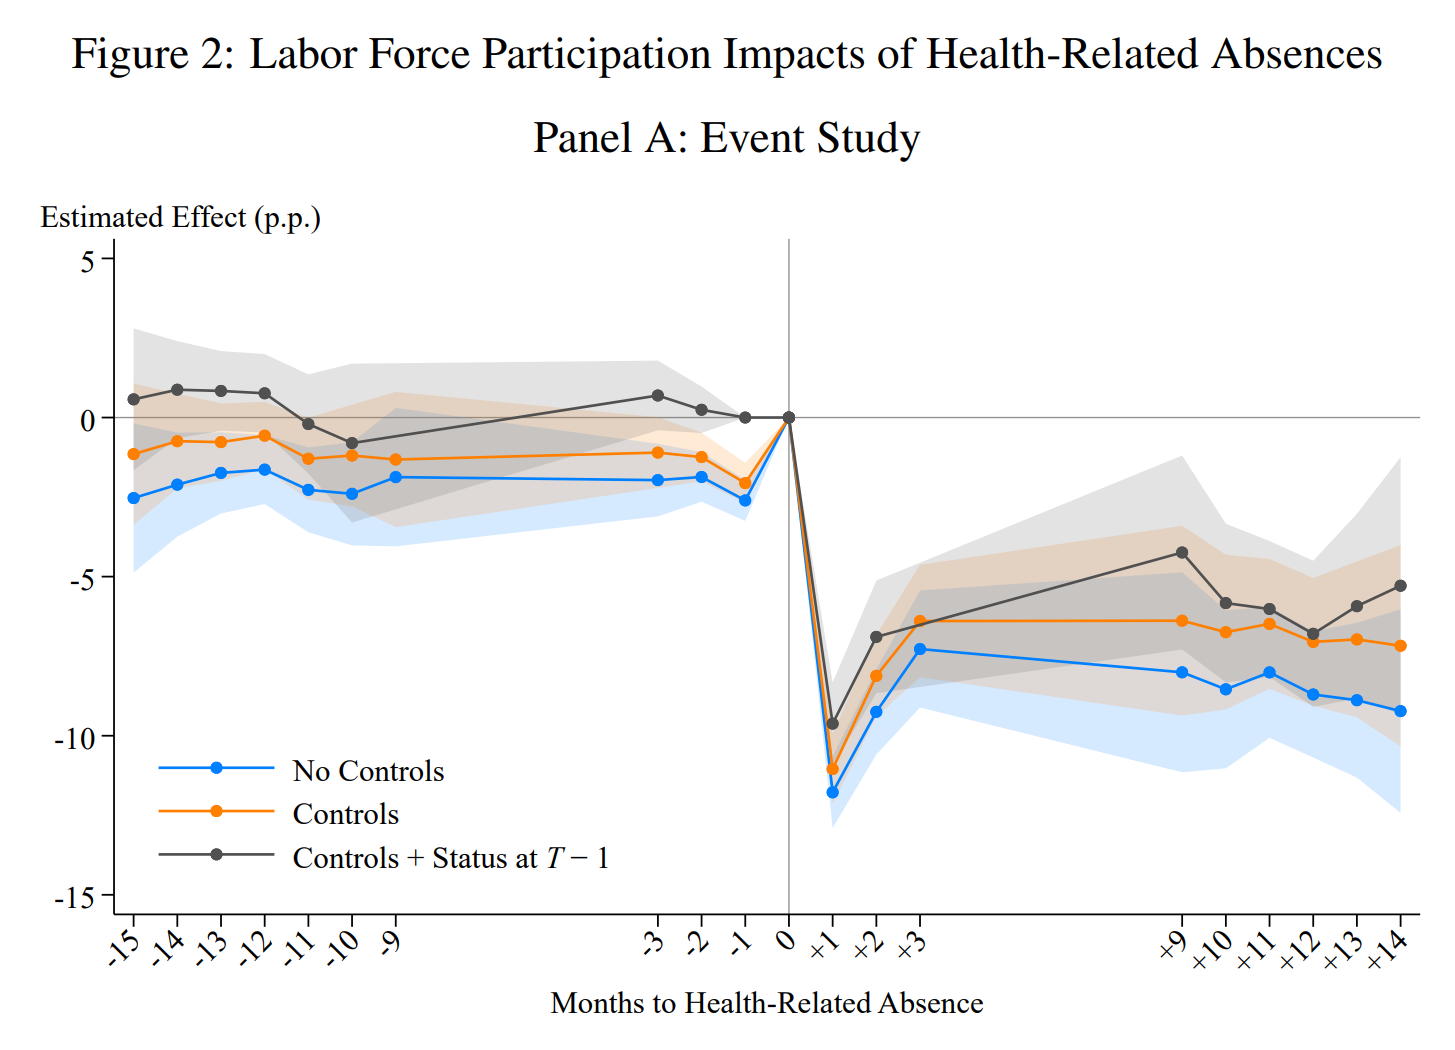 Labor force participation impacts of health-related absences event study. The figure plots coefficient estimates βk from Equation 1, which represents the effect of a health-related absence during the pandemic on the probability of labor force participation k months before or after the absence. The blue, orange, and gray lines respectively plot estimates without demographic controls, with demographic controls, and with controls for demographics and labor market status. Gaps between months 3 and 9 are due to sample rotation. The color bands depict pointwise 95-percent confidence intervals. Standard errors are clustered at the worker level. Graphic: Goda and Soltas, 2022 / NBER